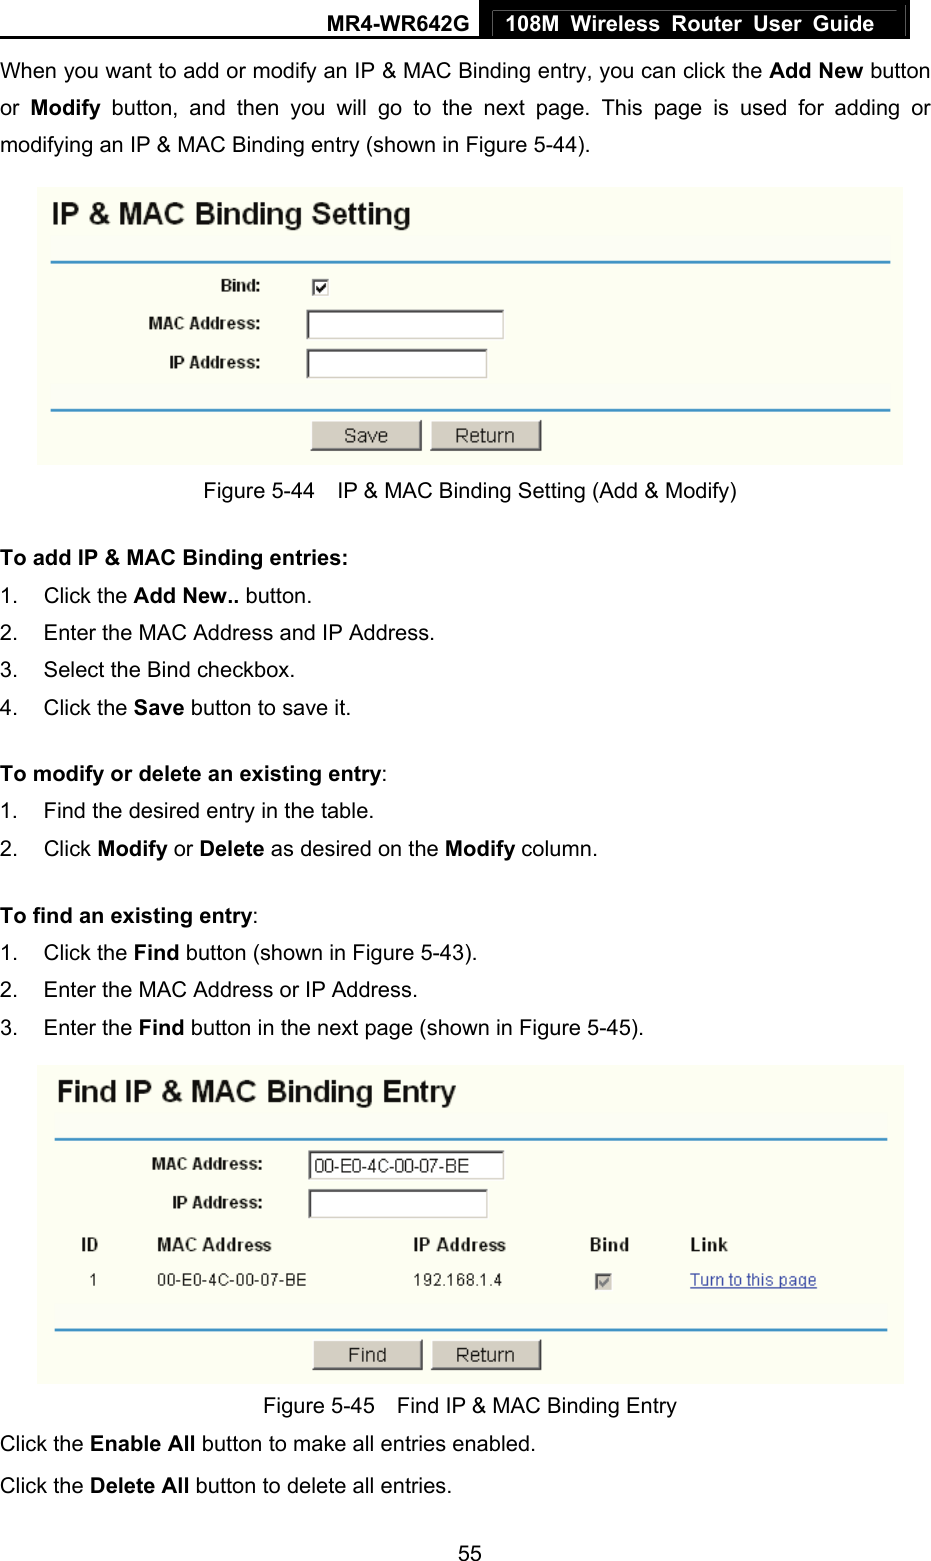 MR4-WR642G 108M Wireless Router User Guide   55When you want to add or modify an IP &amp; MAC Binding entry, you can click the Add New button or  Modify button, and then you will go to the next page. This page is used for adding or modifying an IP &amp; MAC Binding entry (shown in Figure 5-44).    Figure 5-44    IP &amp; MAC Binding Setting (Add &amp; Modify) To add IP &amp; MAC Binding entries: 1. Click the Add New.. button.   2.  Enter the MAC Address and IP Address. 3.  Select the Bind checkbox.   4. Click the Save button to save it. To modify or delete an existing entry: 1.  Find the desired entry in the table.   2. Click Modify or Delete as desired on the Modify column.   To find an existing entry: 1. Click the Find button (shown in Figure 5-43).   2.  Enter the MAC Address or IP Address. 3. Enter the Find button in the next page (shown in Figure 5-45).  Figure 5-45    Find IP &amp; MAC Binding Entry Click the Enable All button to make all entries enabled. Click the Delete All button to delete all entries. 